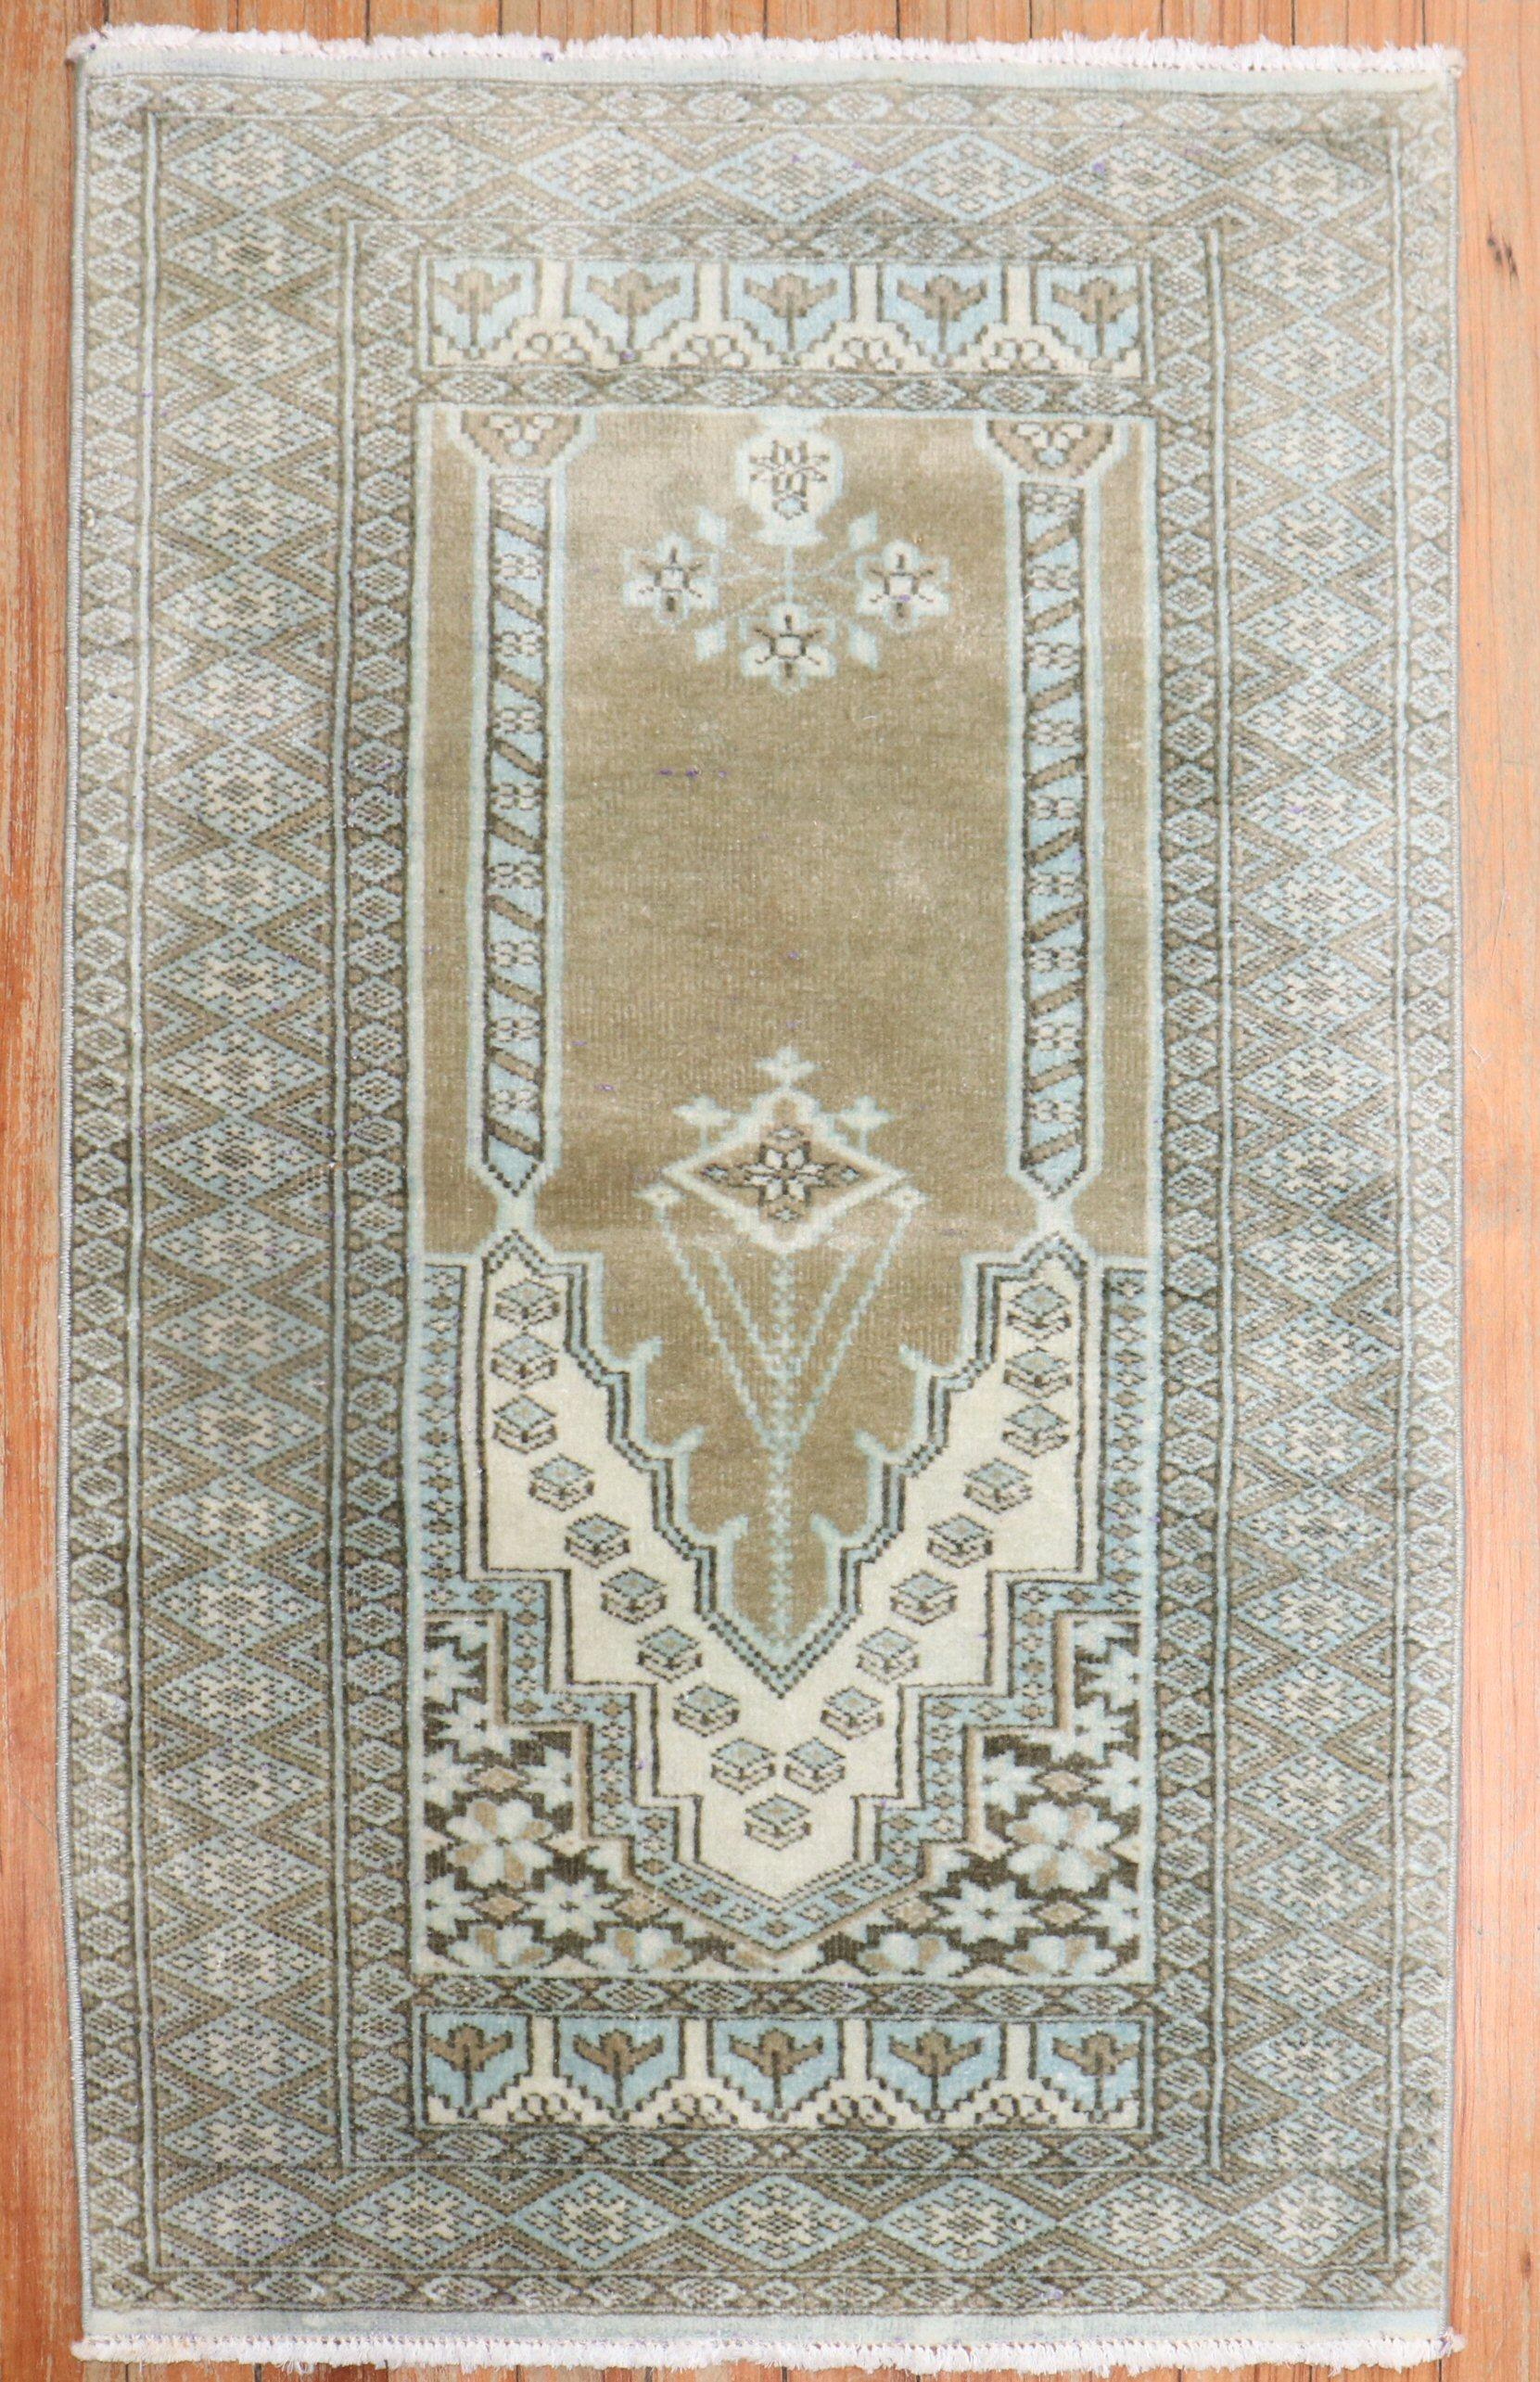 A mini-size Bokhara Prayer niche rug from the 3rd quarter of the 20th century

Measures: 2' x 3'1''.
   